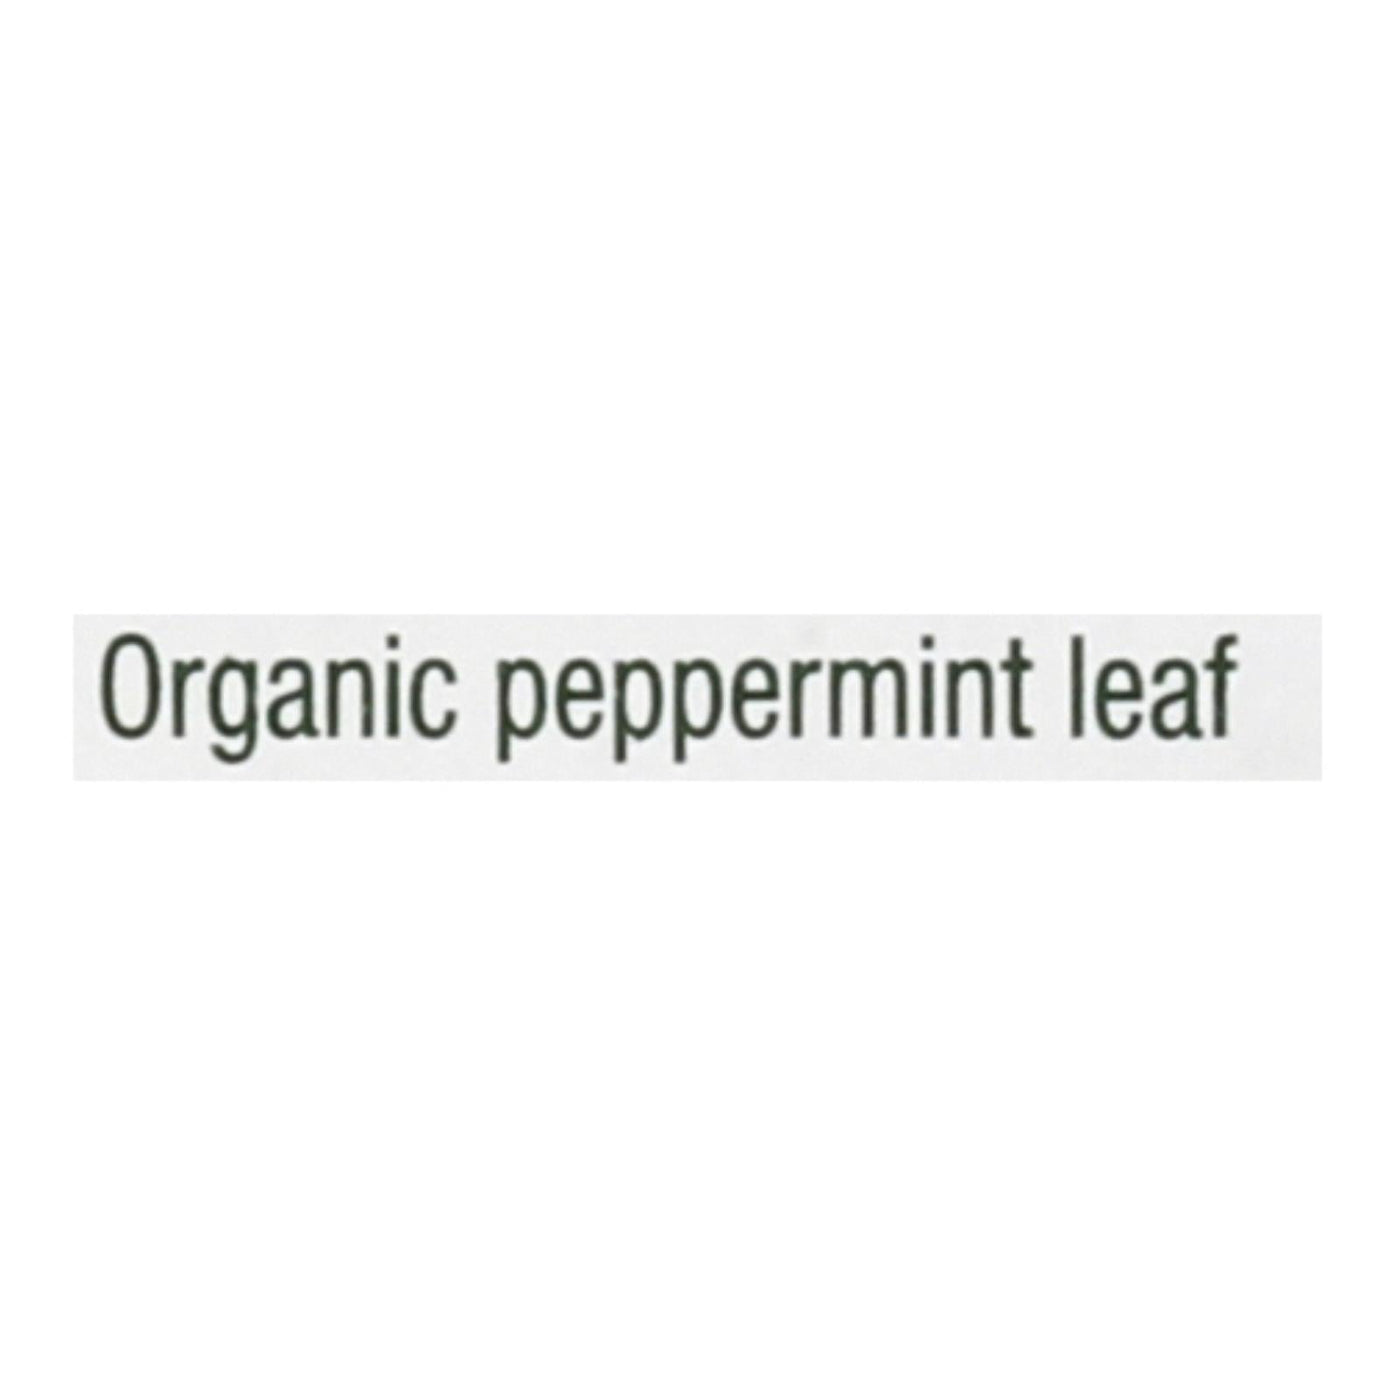 Traditional Medicinals Organic Peppermint Herbal Tea - Caffeine Free - Case Of 6 - 16 Bags | OnlyNaturals.us